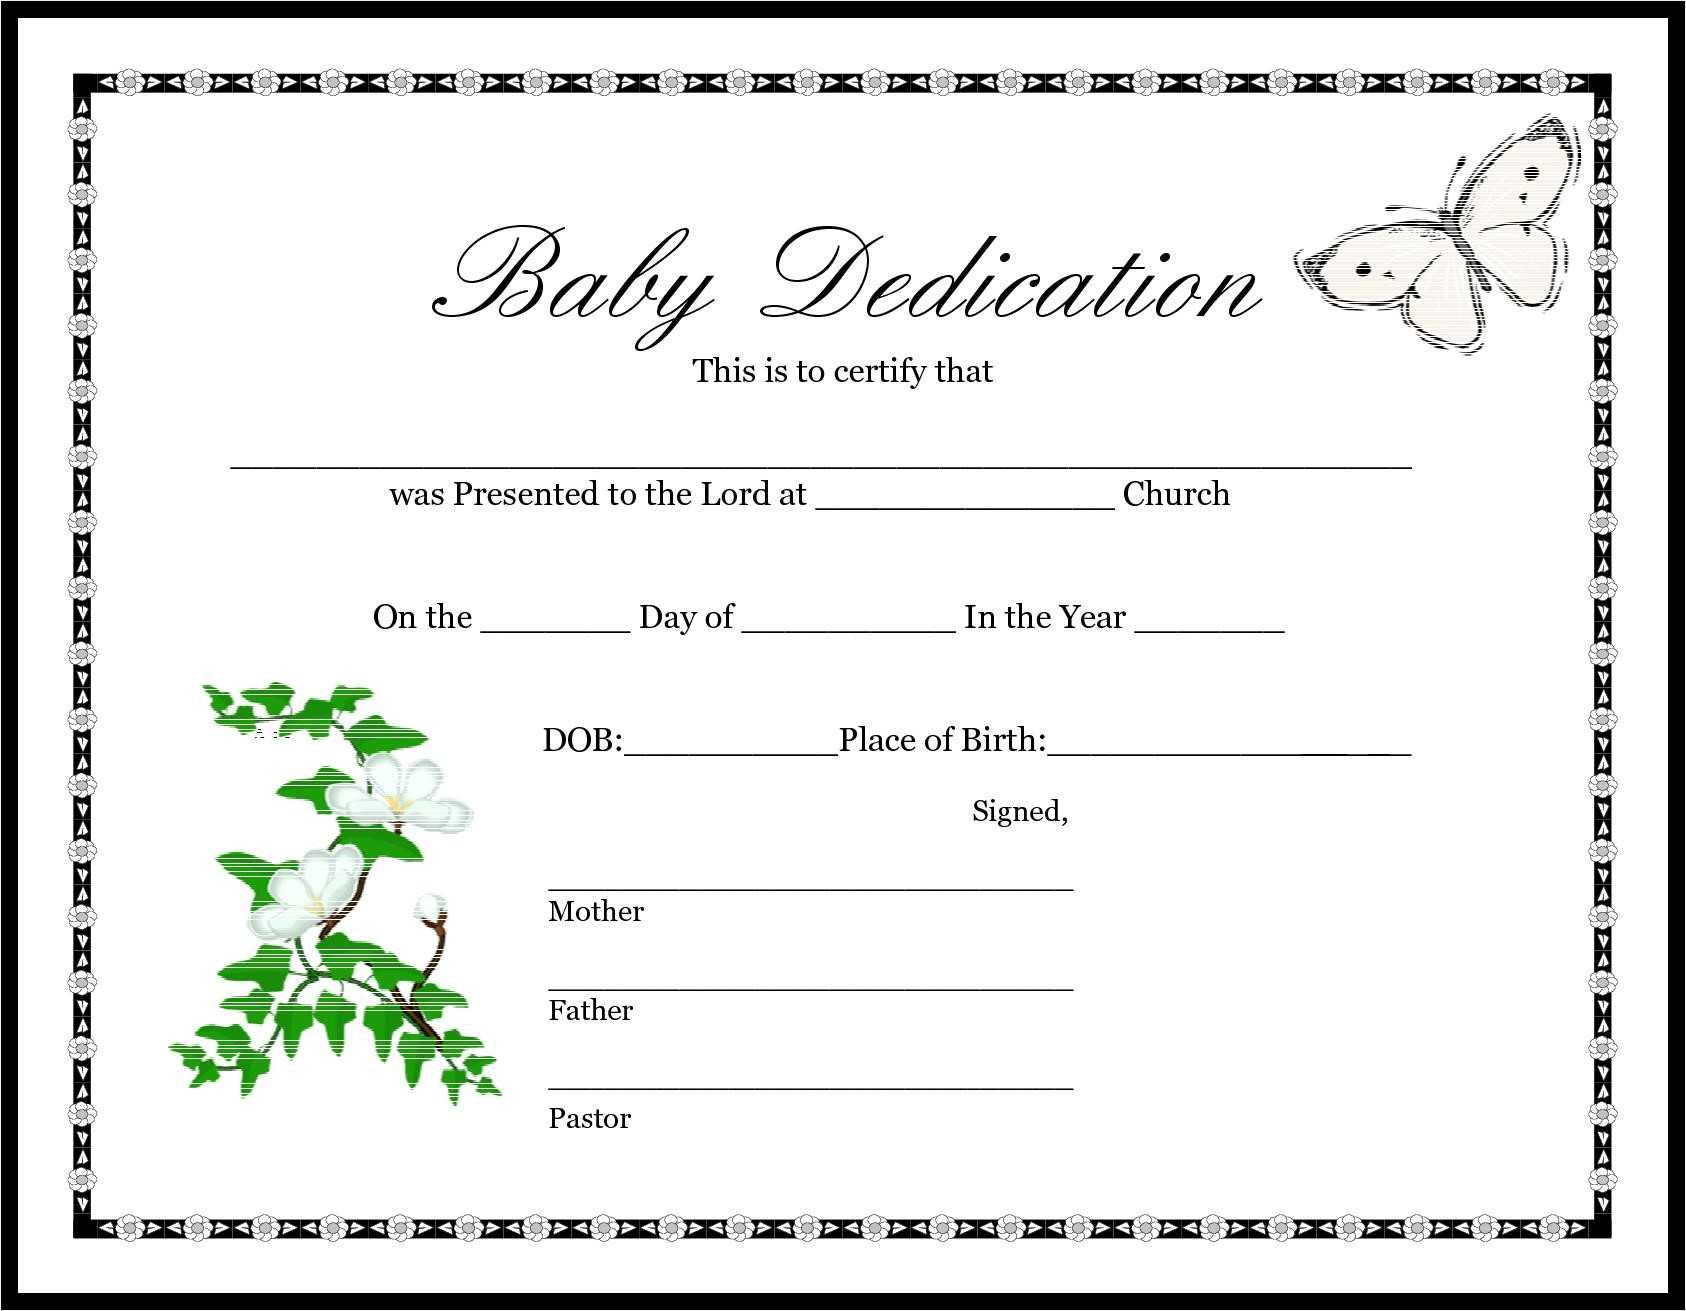 Certificates. Wonderful Official Birth Certificate Template For Baby Dedication Certificate Template